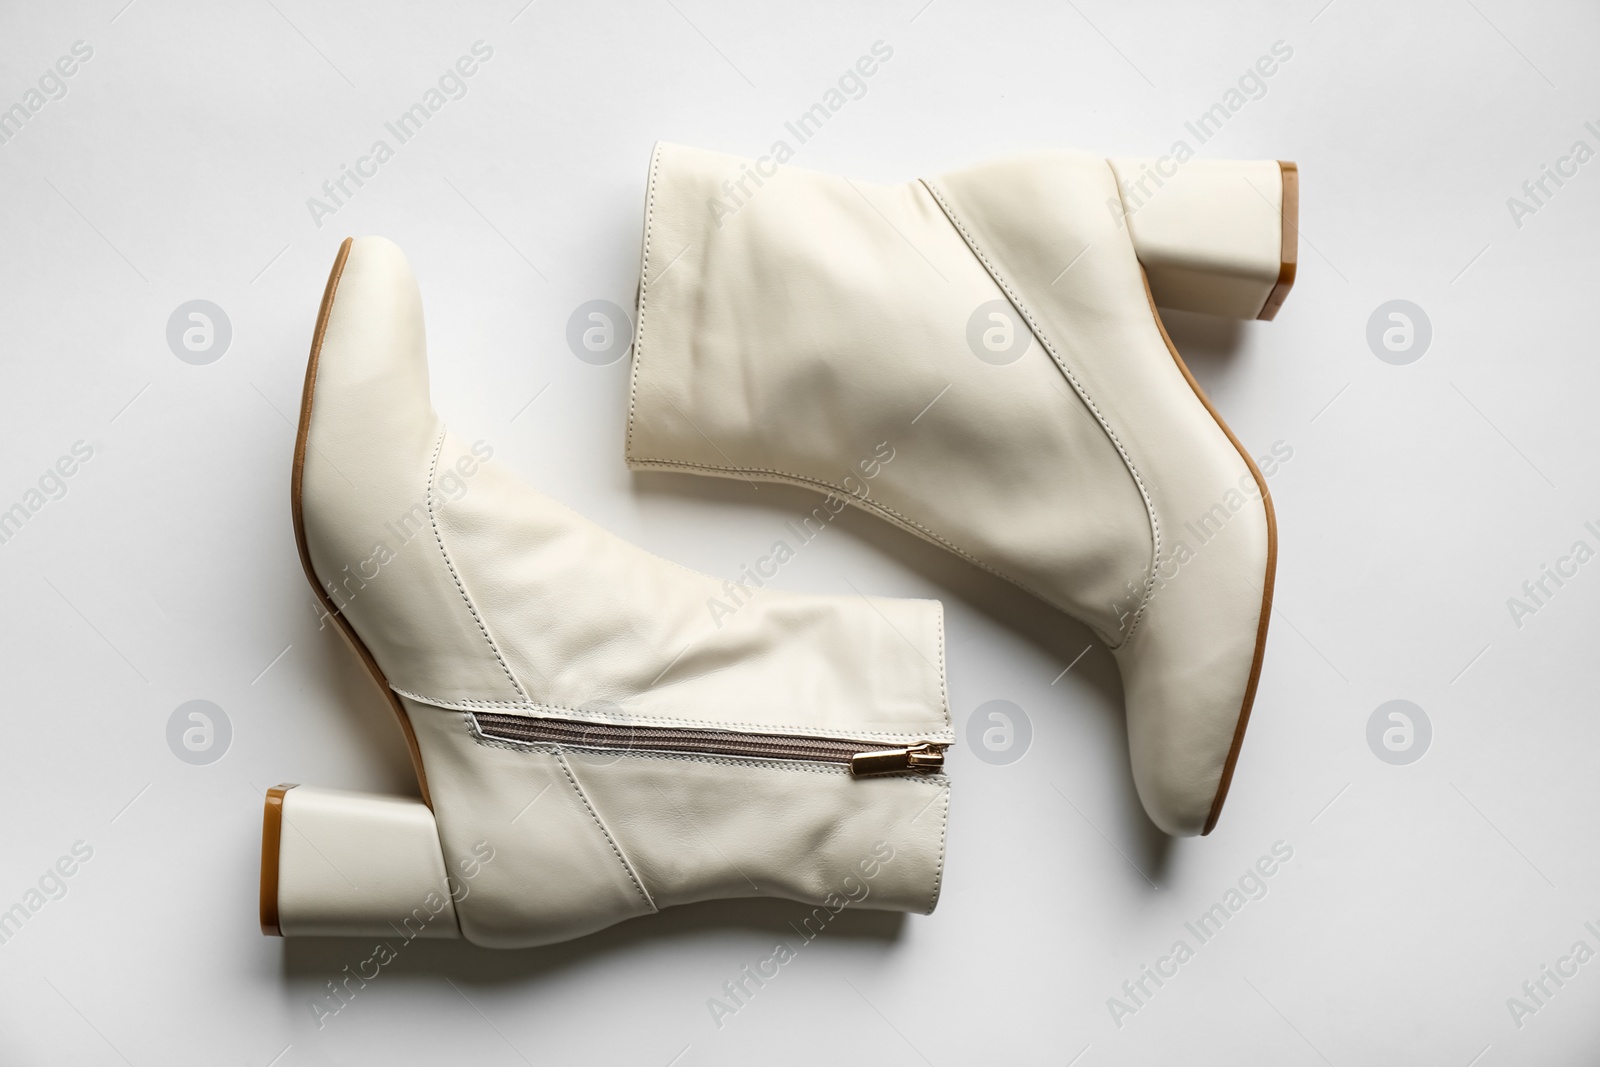 Photo of Pair of stylish leather shoes on white background, top view